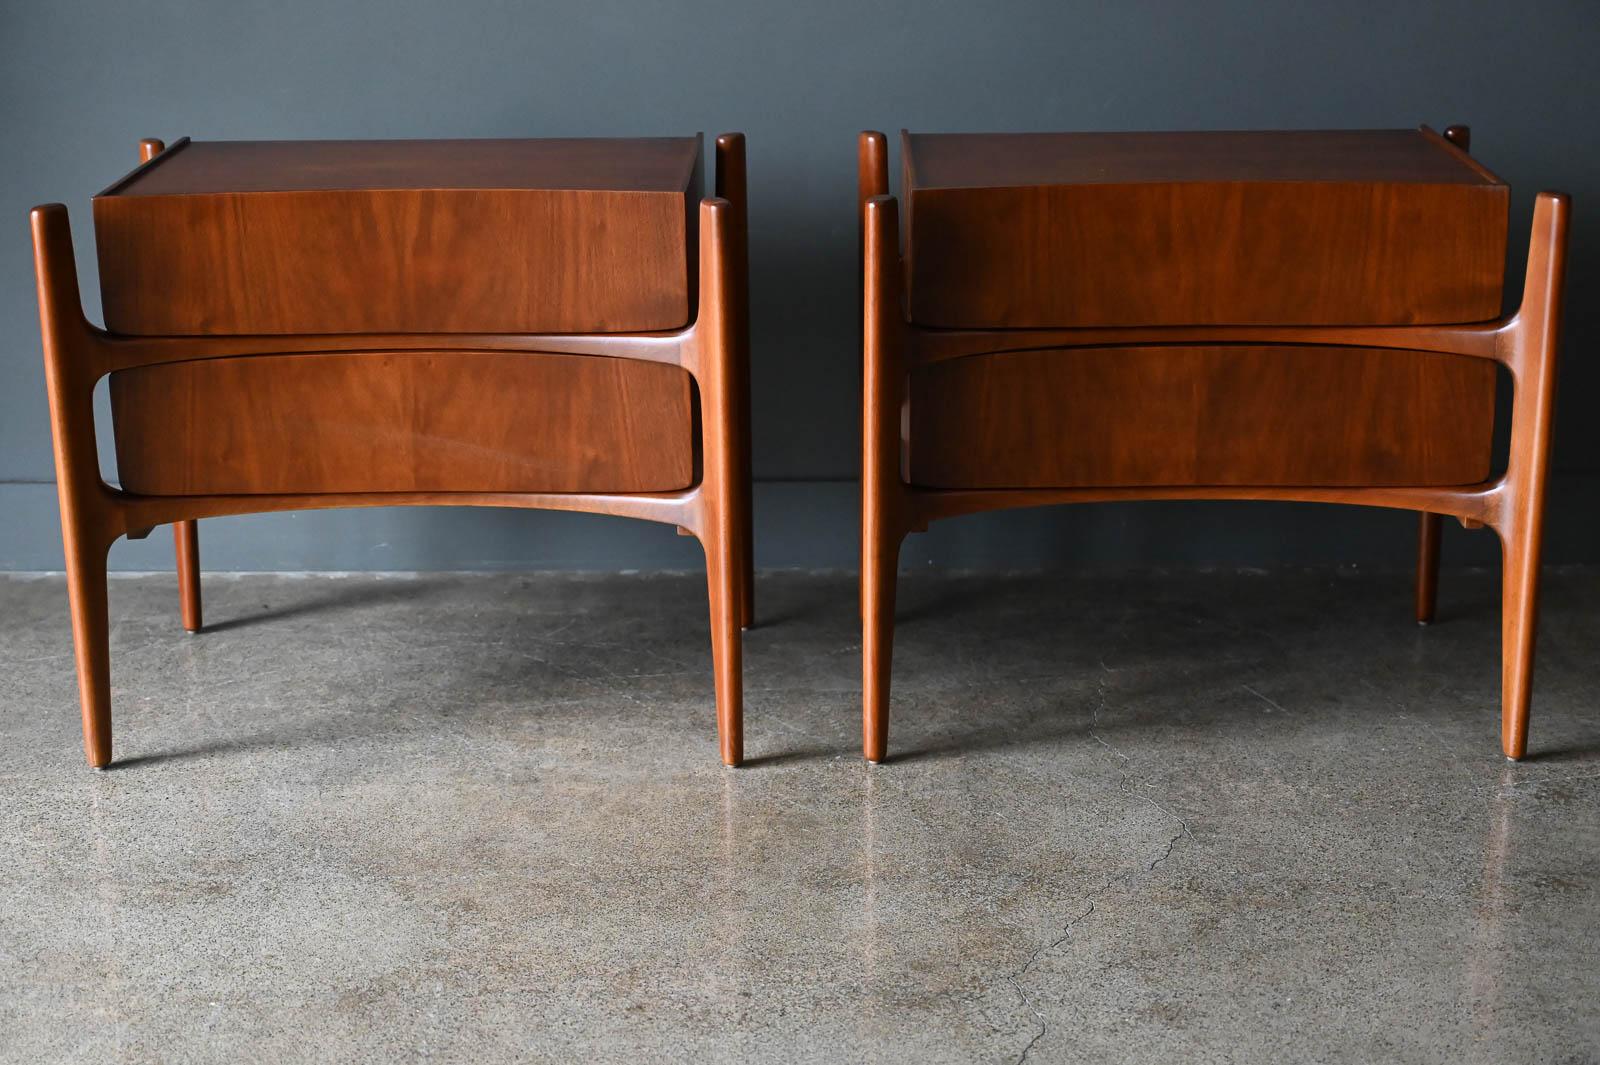 Mid-Century Modern Pair of Walnut Sculpted Nightstands or End Tables by William Hinn, circa 1955